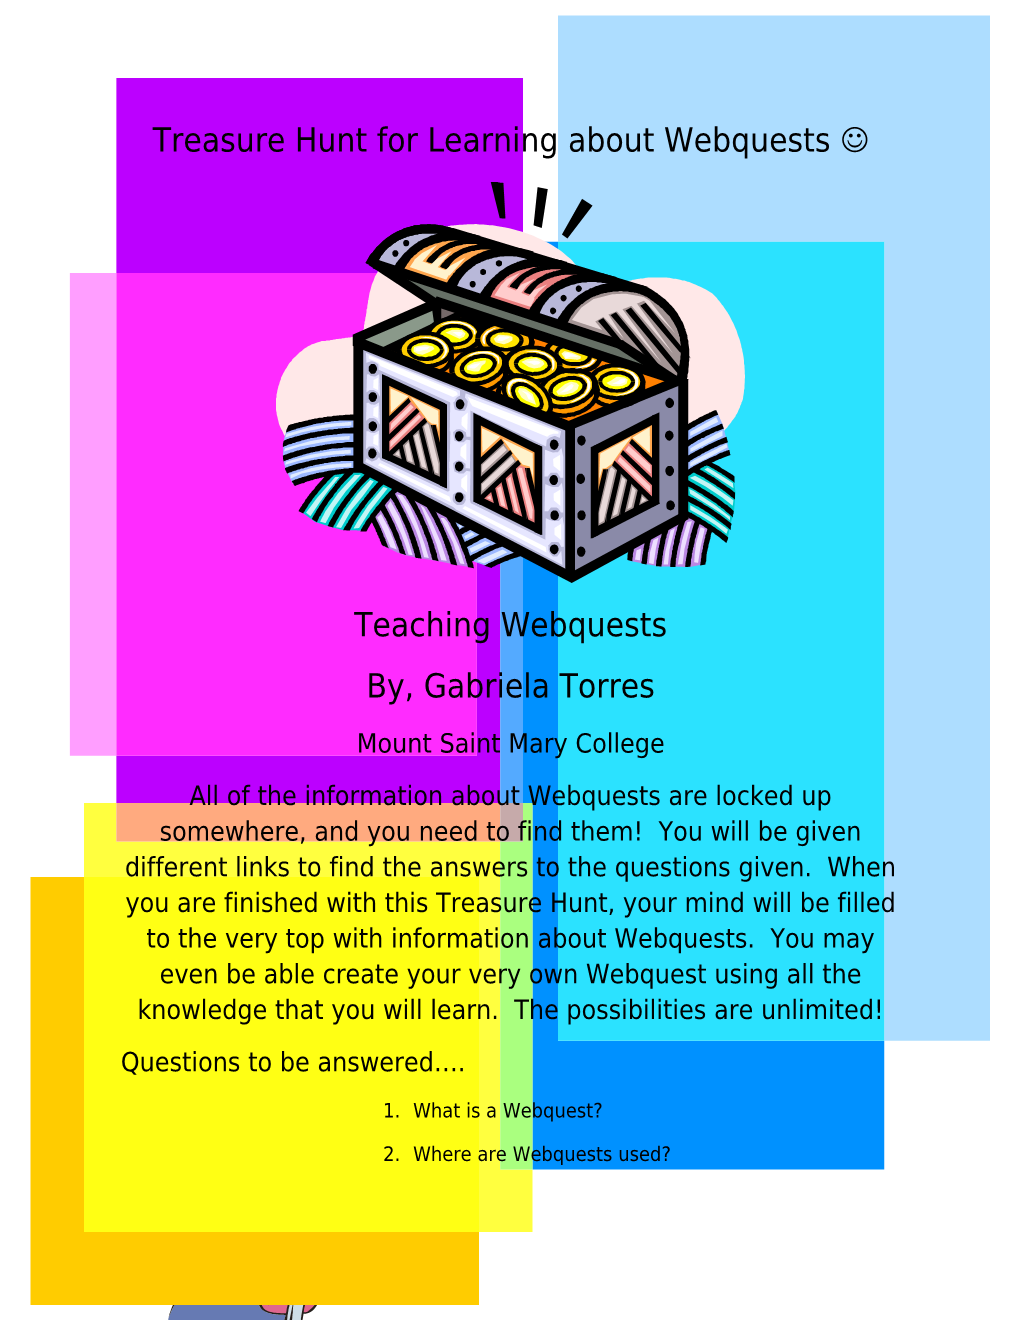 Treasure Hunt for Learning About Webquests